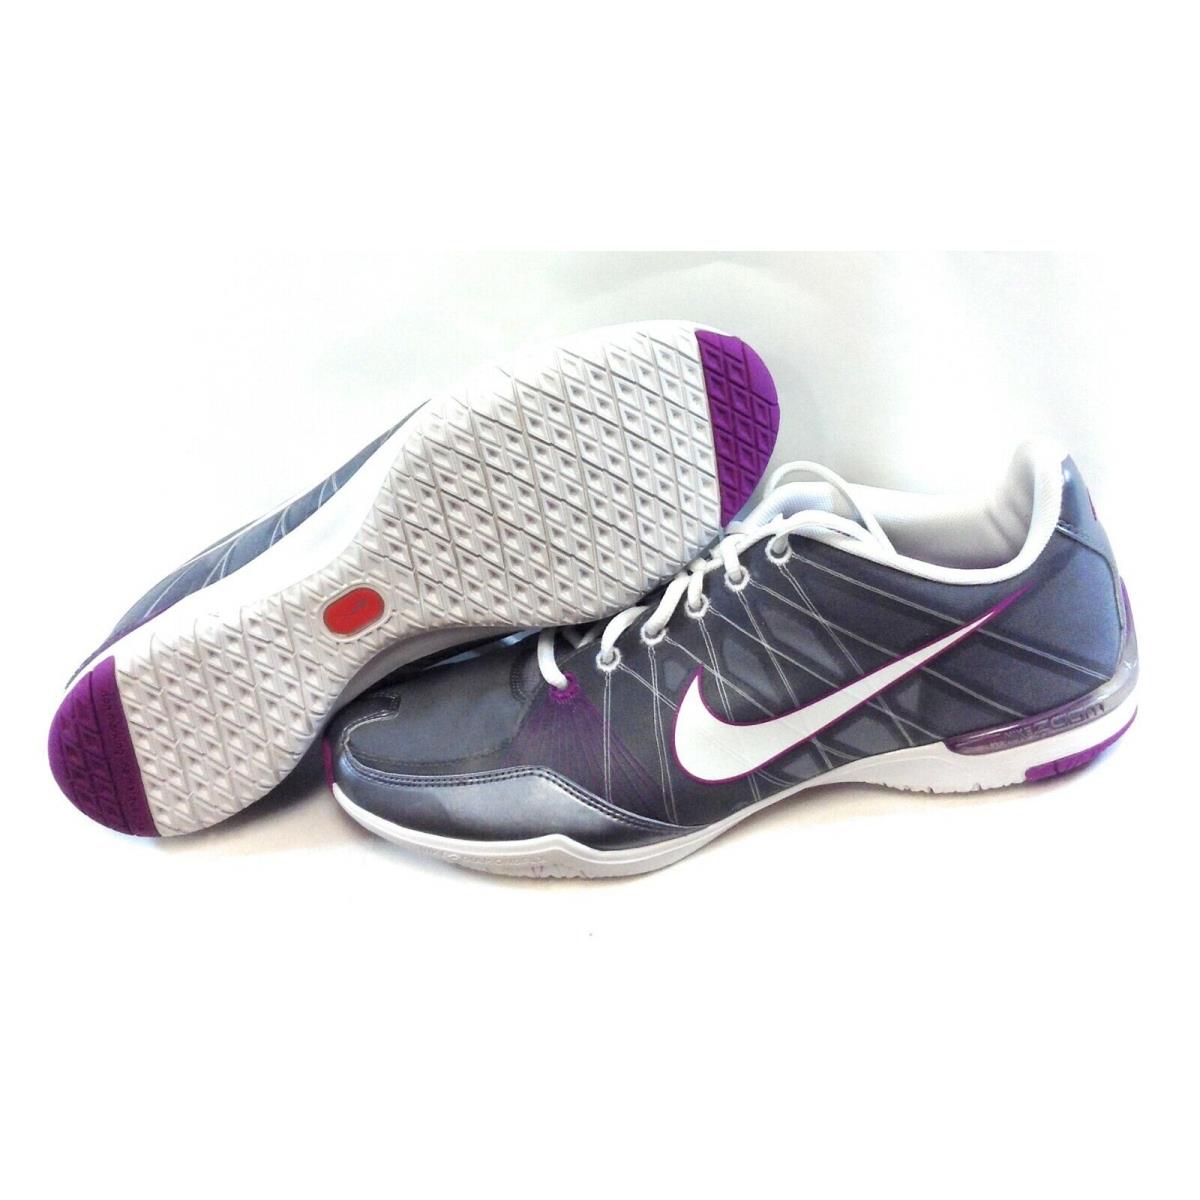 Womens Nike Zoom Sister One + 344986 014 Grey Purple 2009 DS Sneakers Shoes - Grey